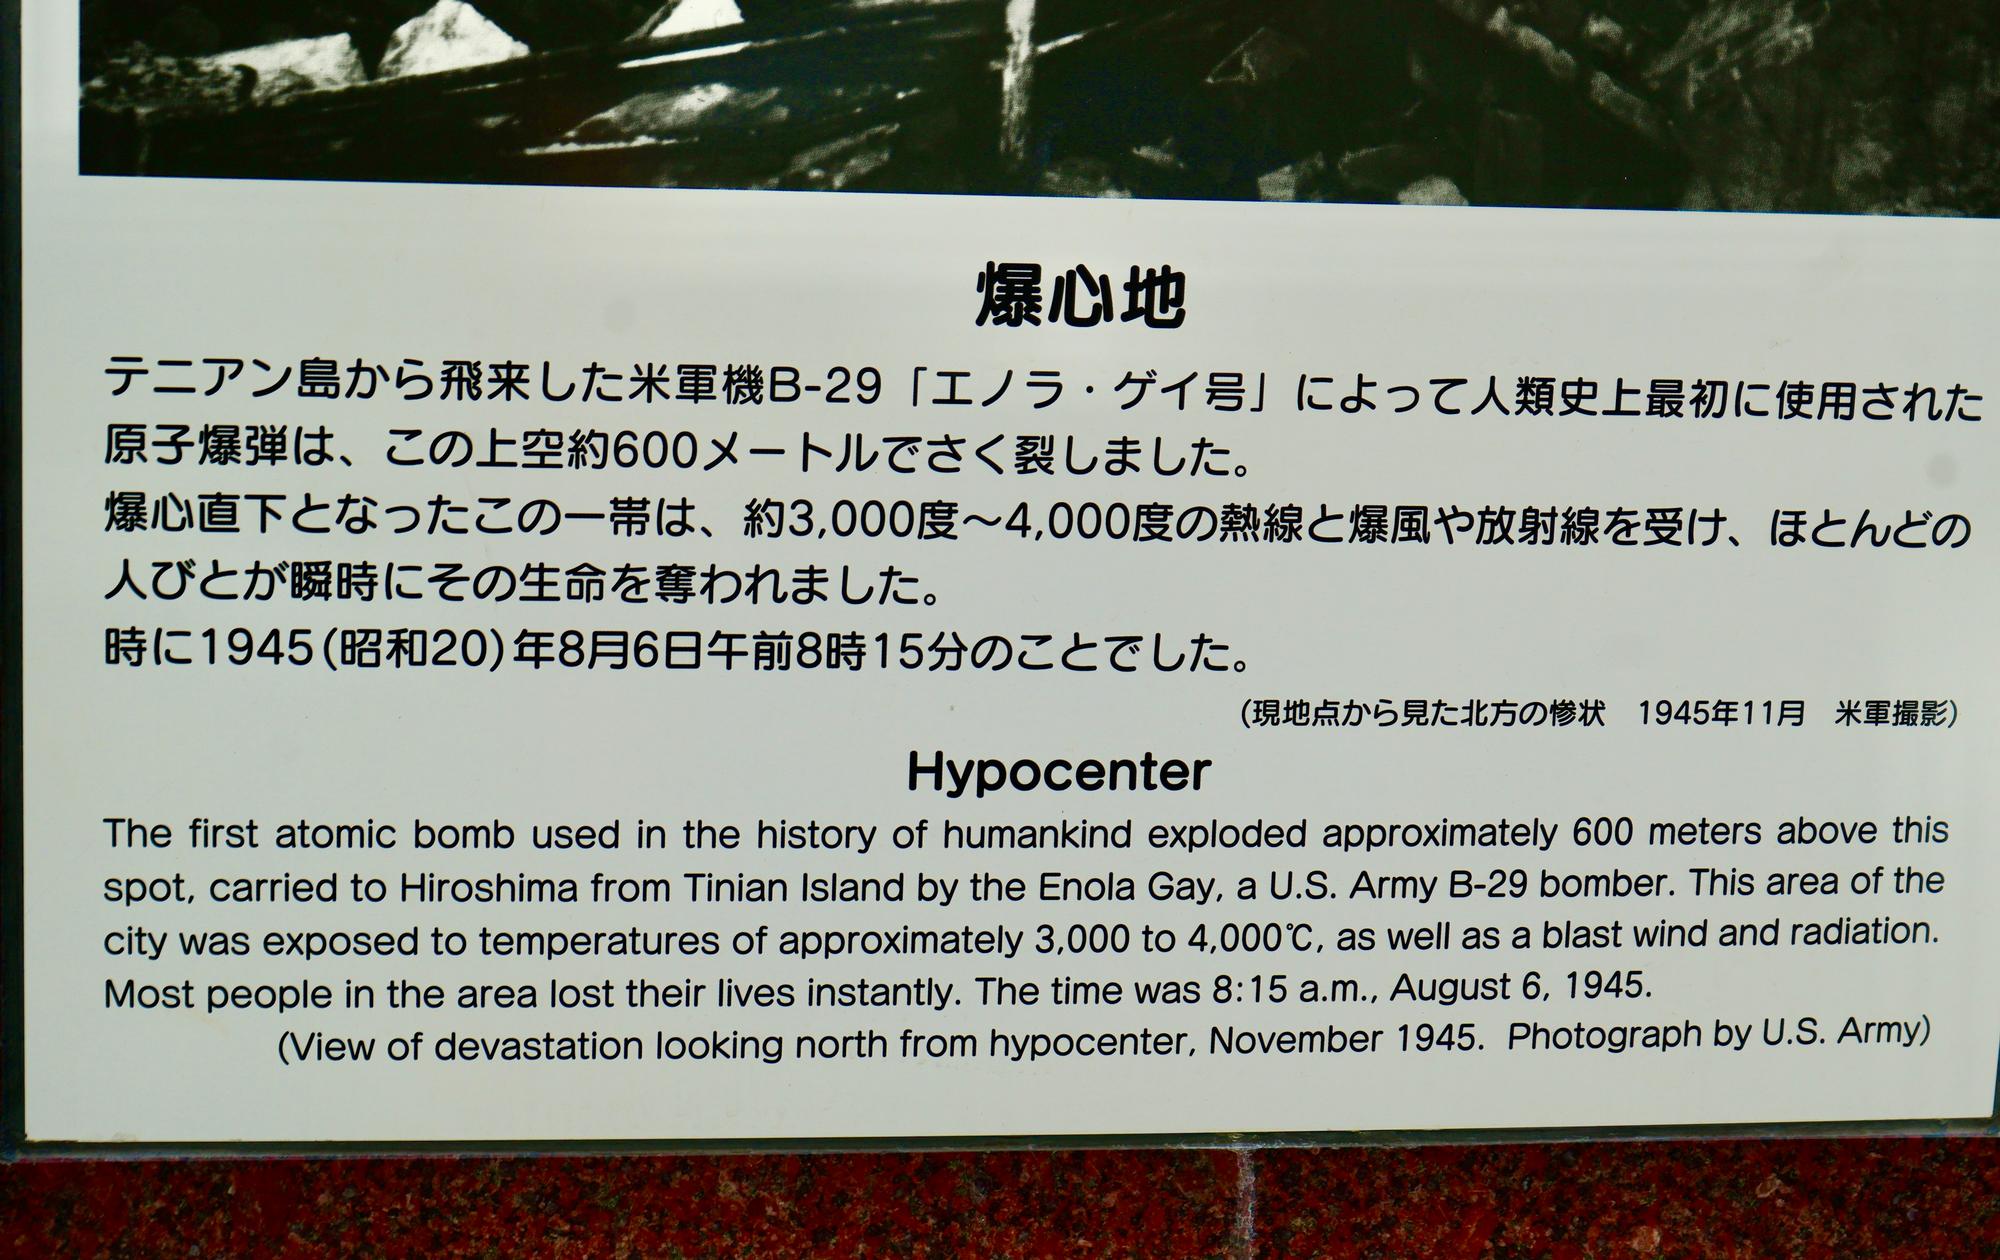 Hypocenter of the bomb